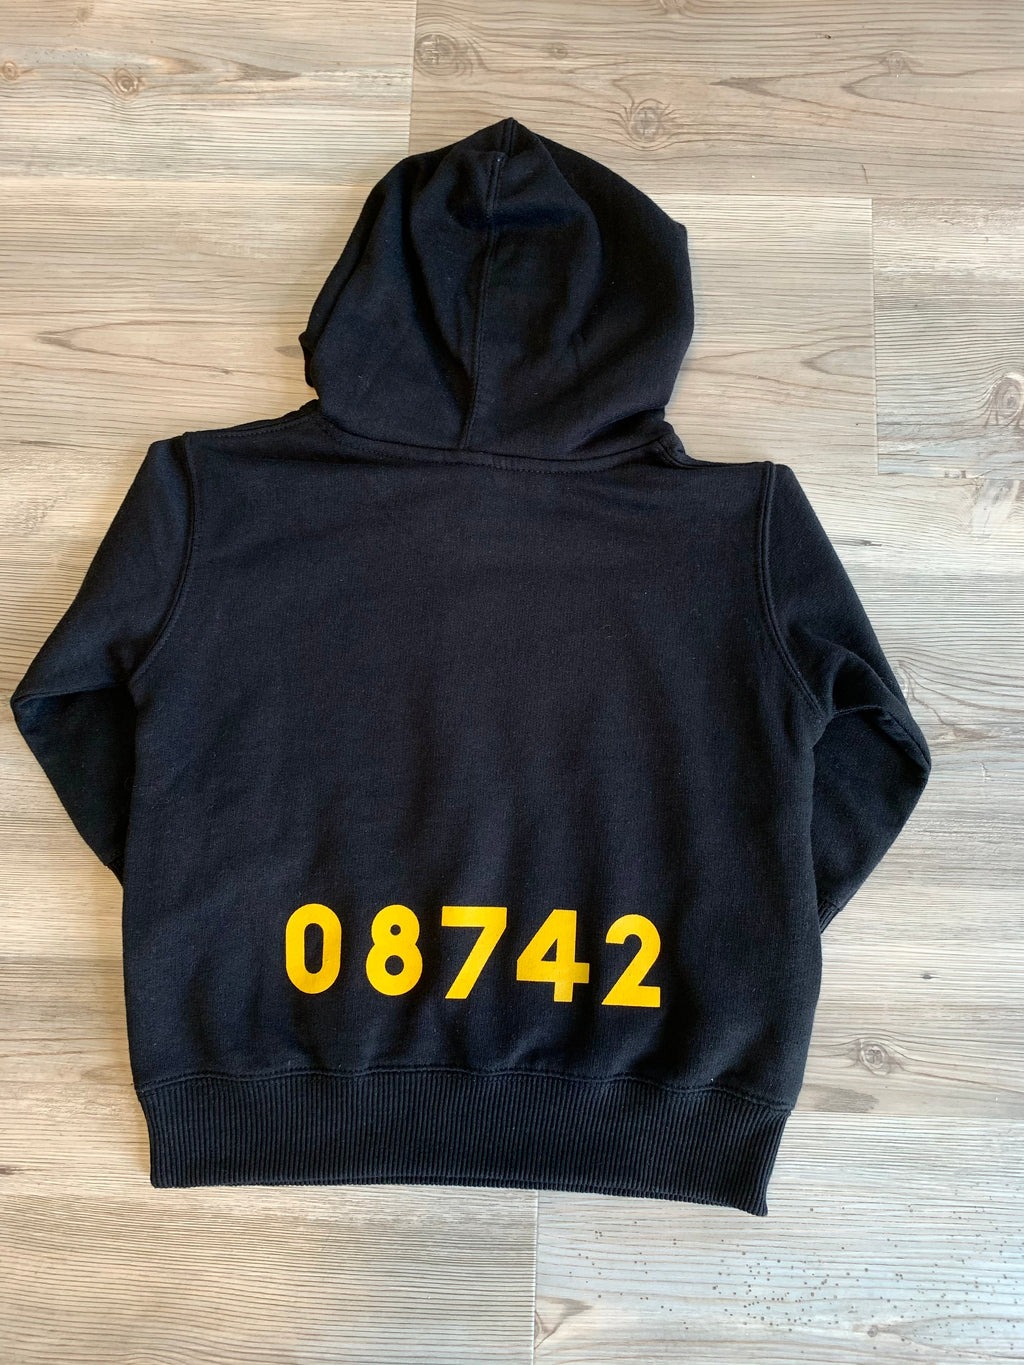 LOCAL Paw Print with 08742 Back-Toddler Hoodies